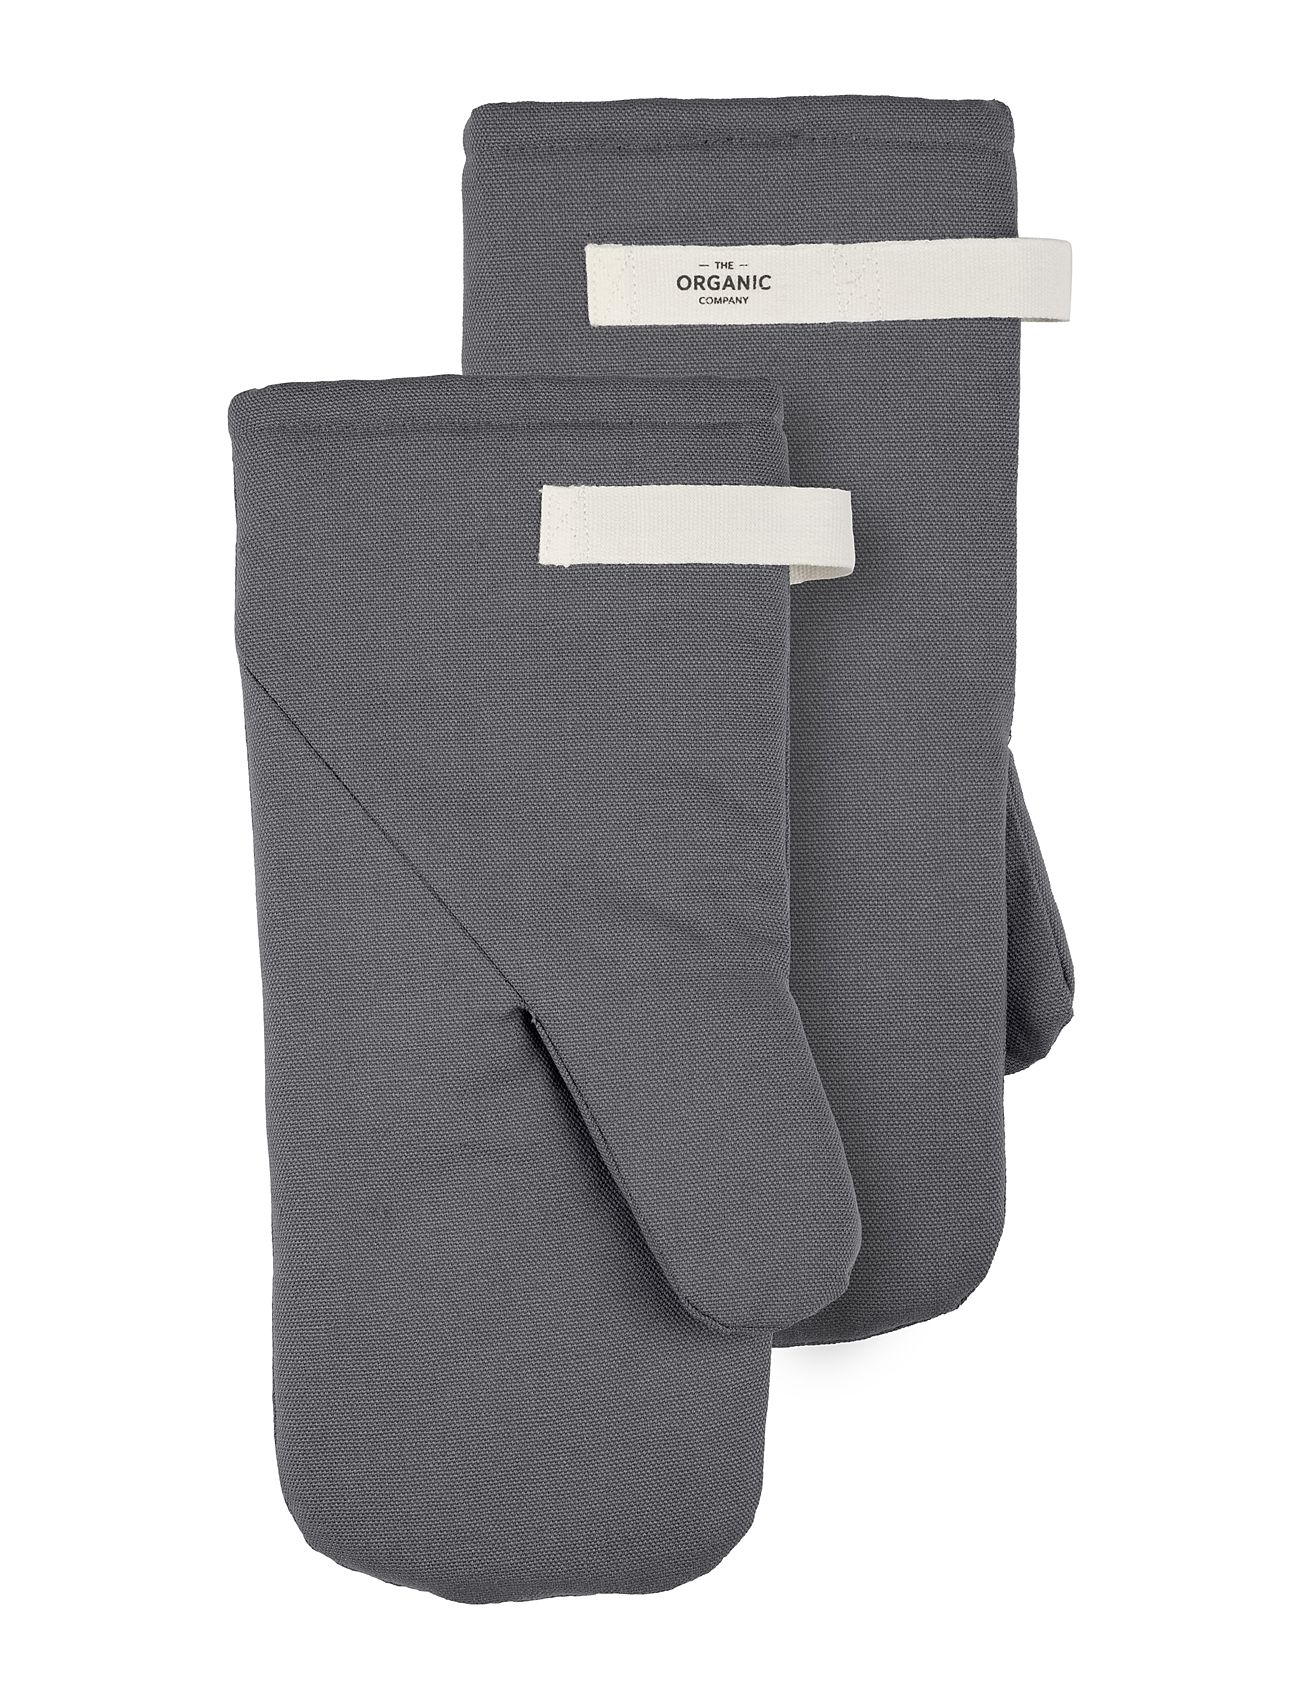 Oven Mitts Large Home Textiles Kitchen Textiles Oven Mitts & Gloves Grey The Organic Company